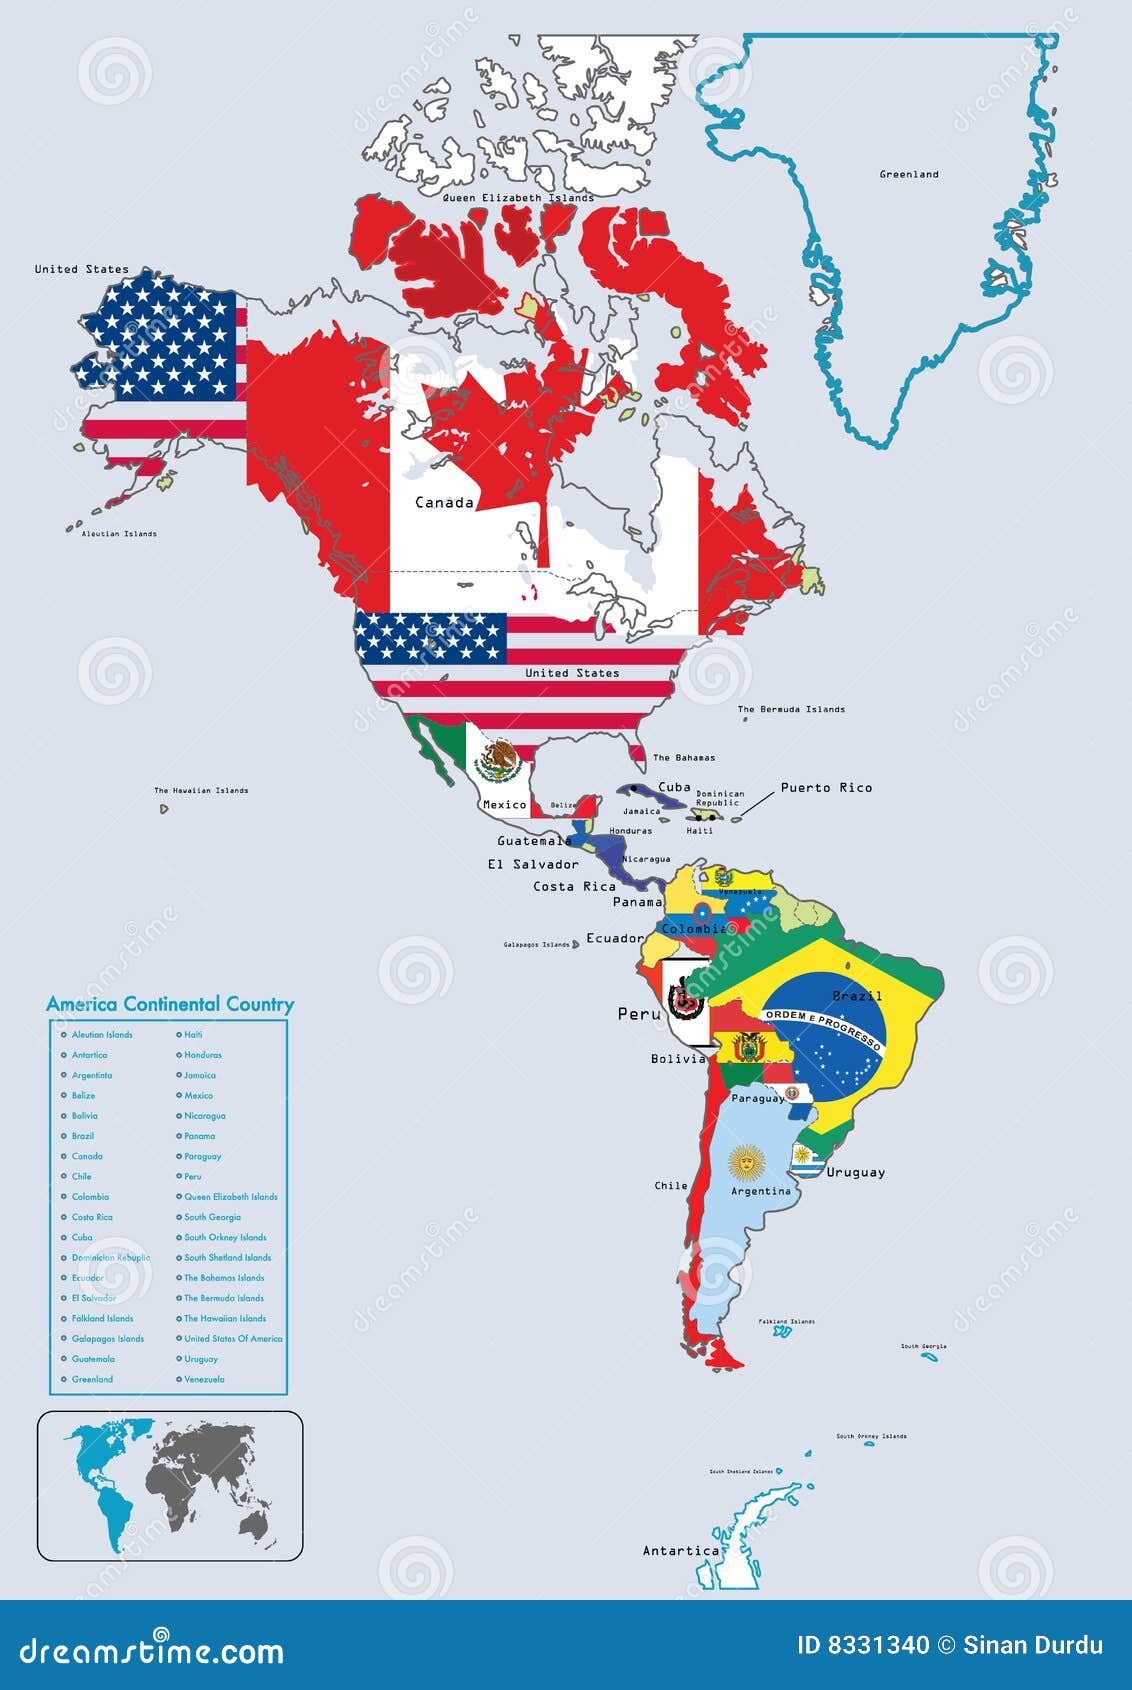 america-continental-country-flags-map-83